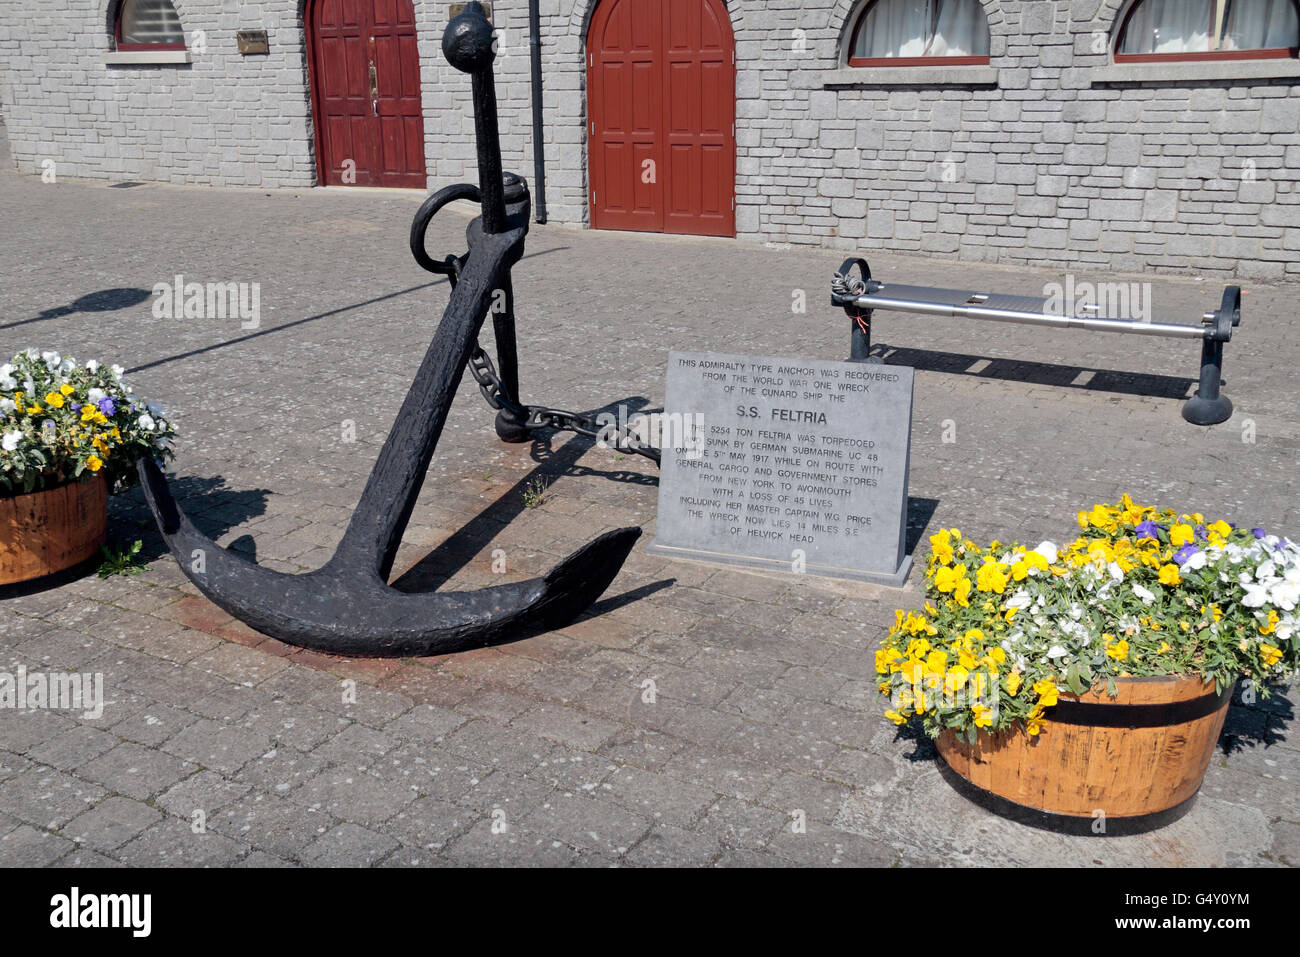 Anker Recoveded aus dem Cunard WWI-Wrack der SS Feltria in Dungarvan, Co. Waterford, Irland (Eire). Stockfoto